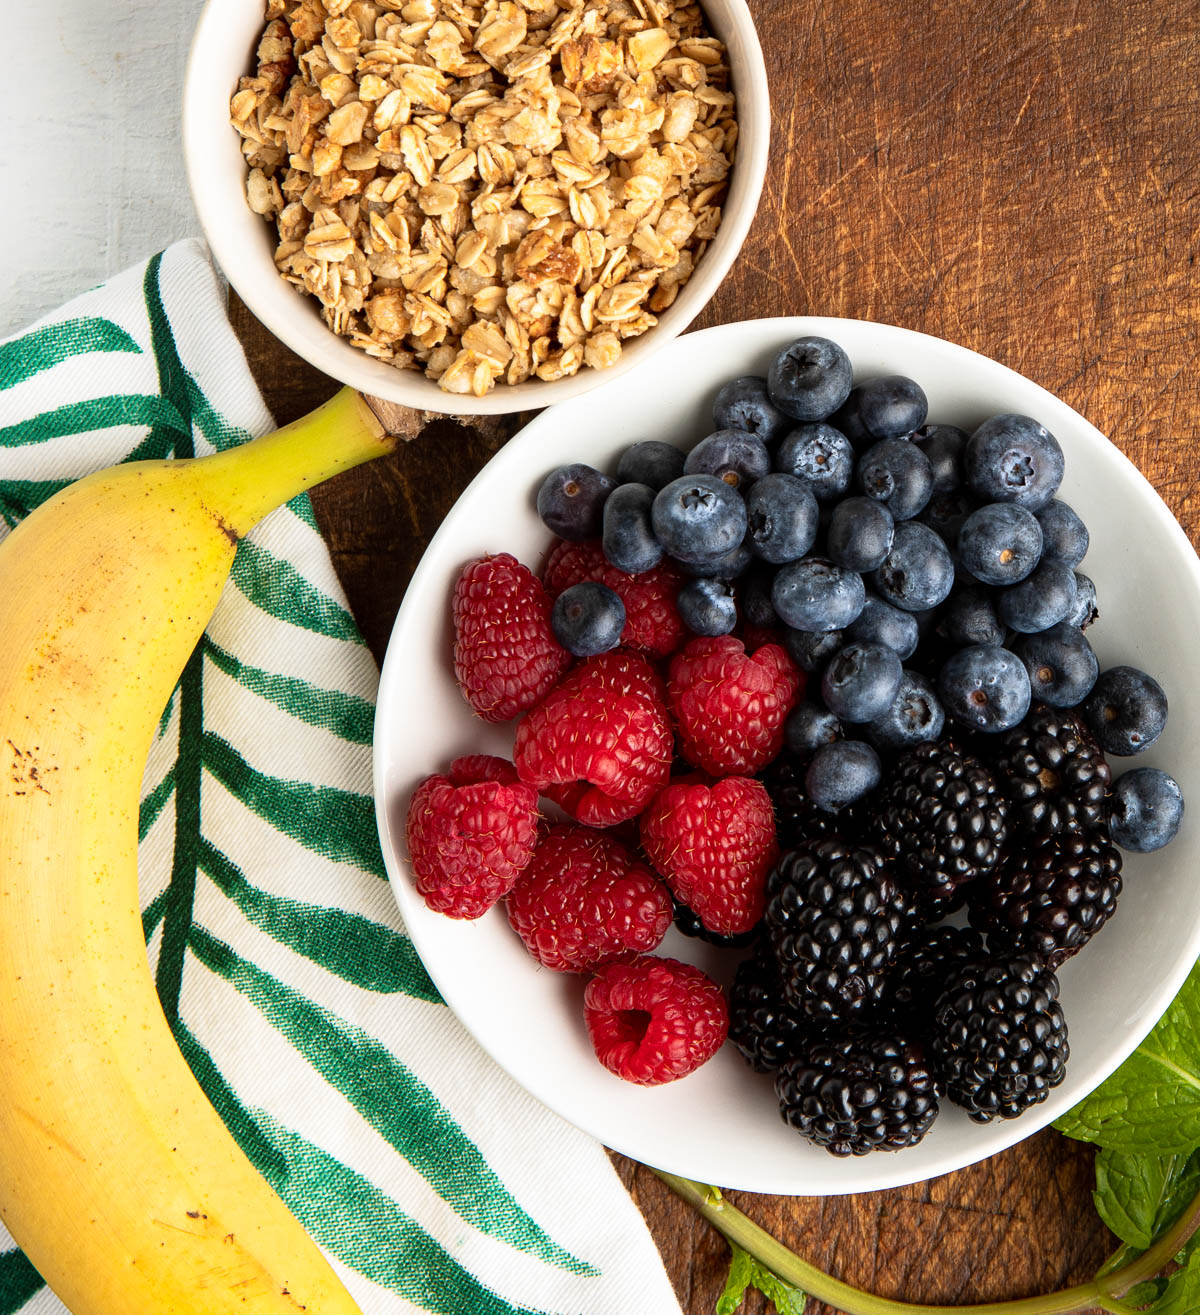 2 white bowls, one with granola and one with a variety of fresh berries, next to a whole banana.